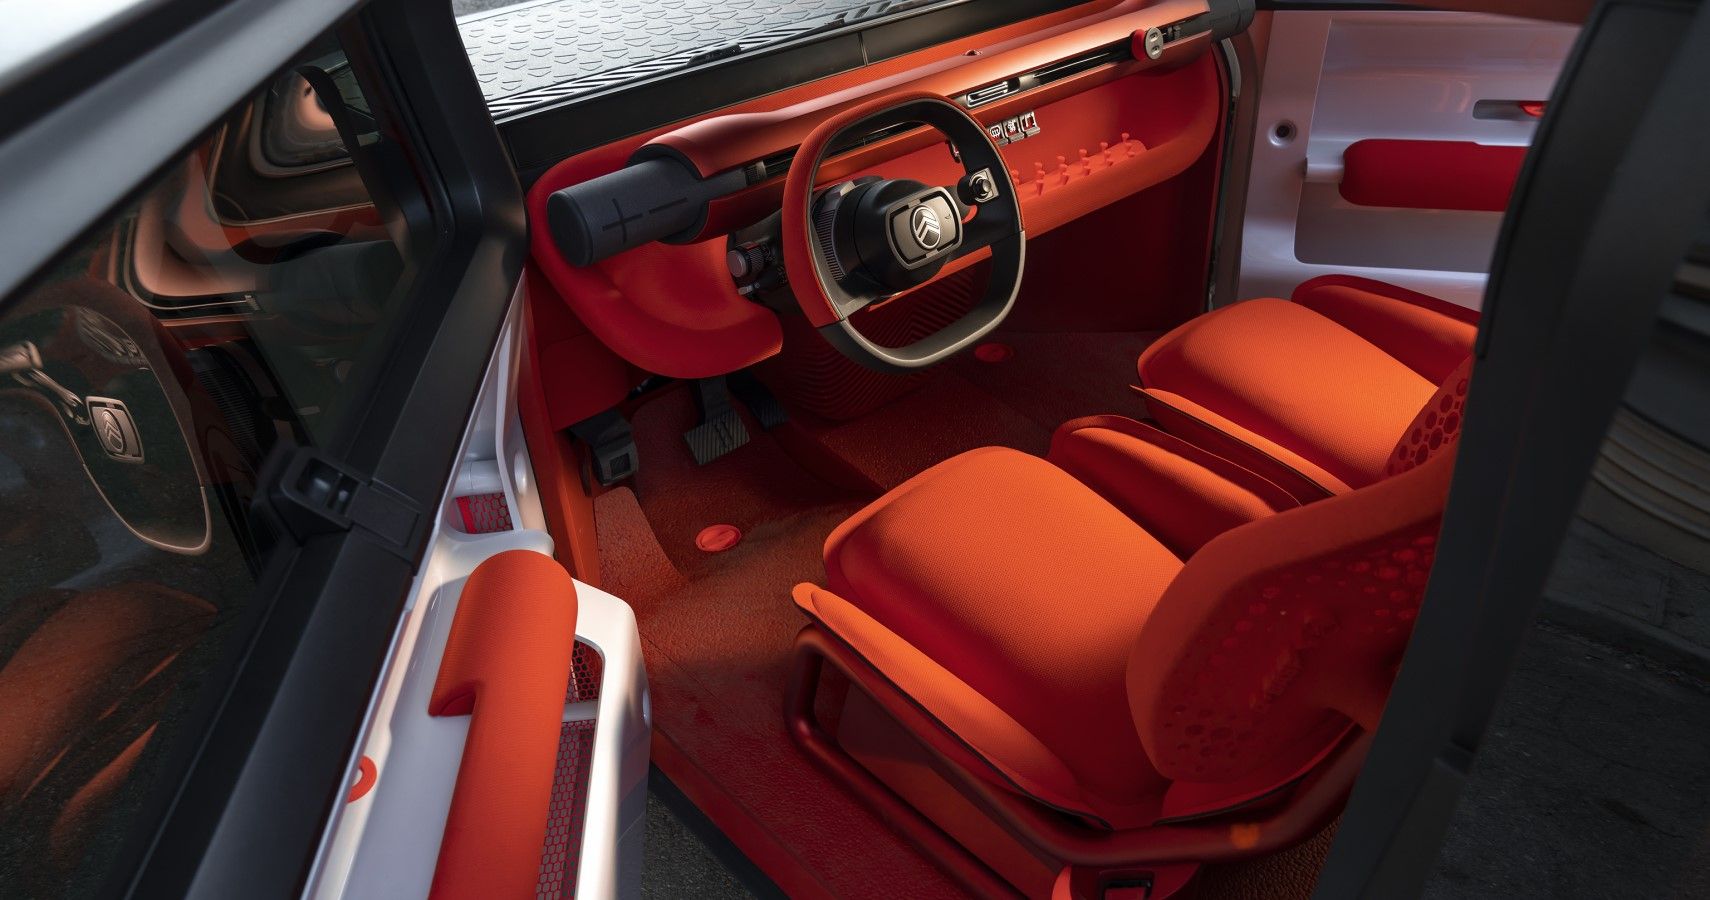 Why The Citroen Oli Concept Has The Most Innovative Car Interior Ever